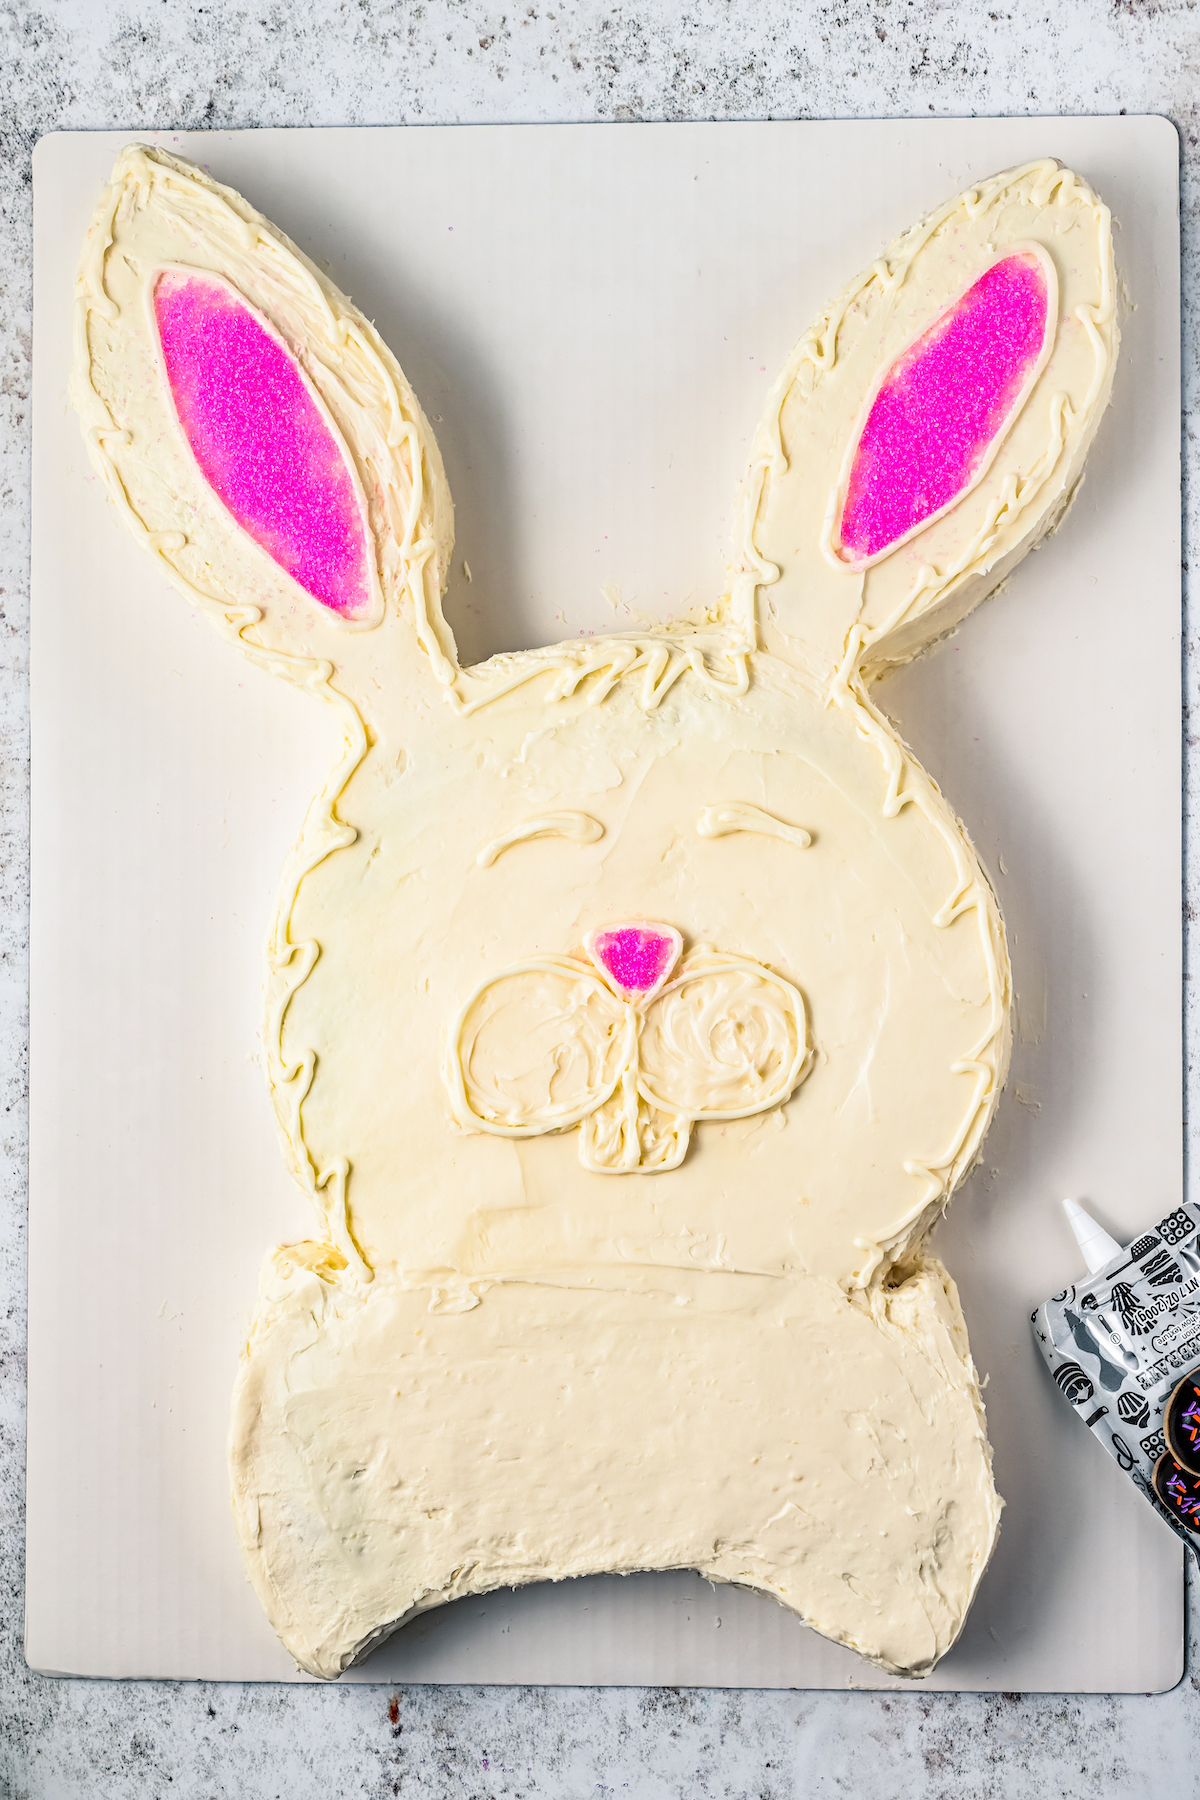 A bunny-shaped cake with pink sugar to make the inner ears, and white icing to outline the eyes, nose, and teeth.